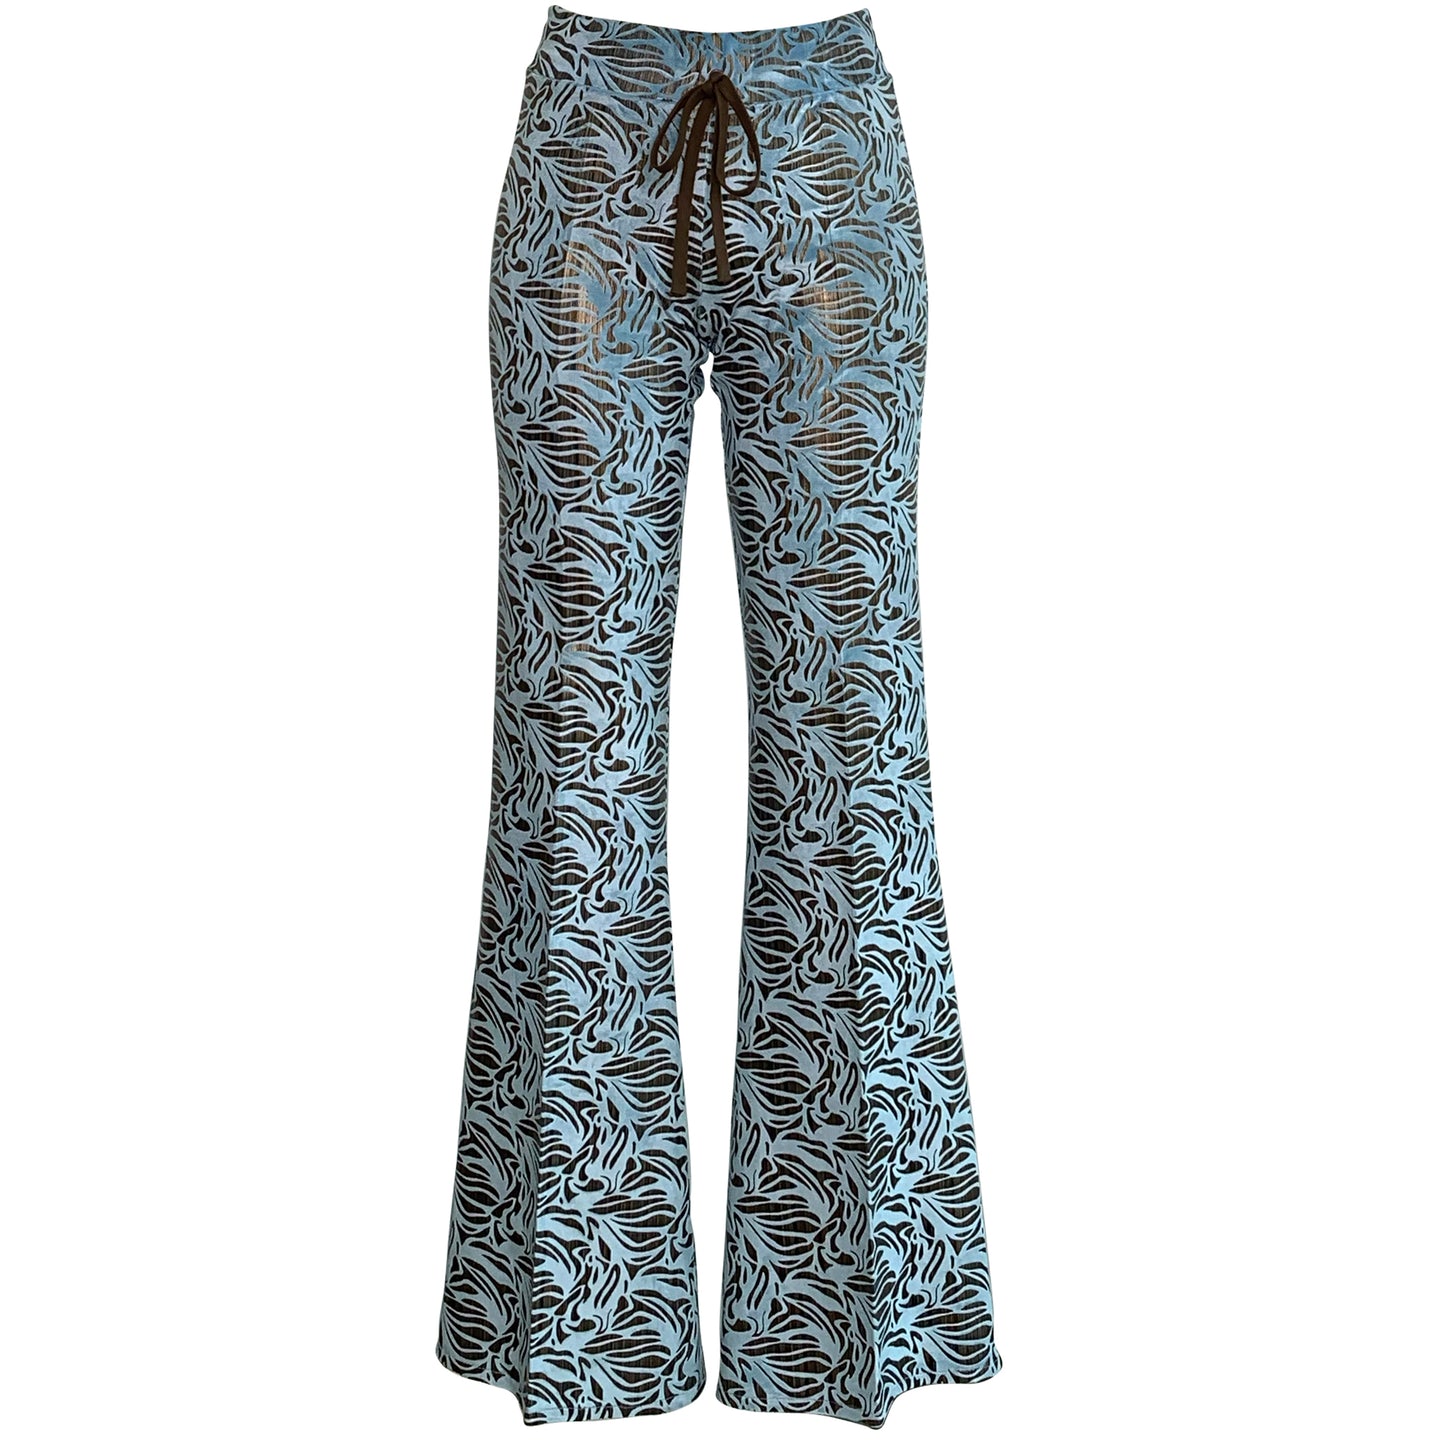 Cesar Galindo Limited Edition Baby Blue Tracksuit Pants